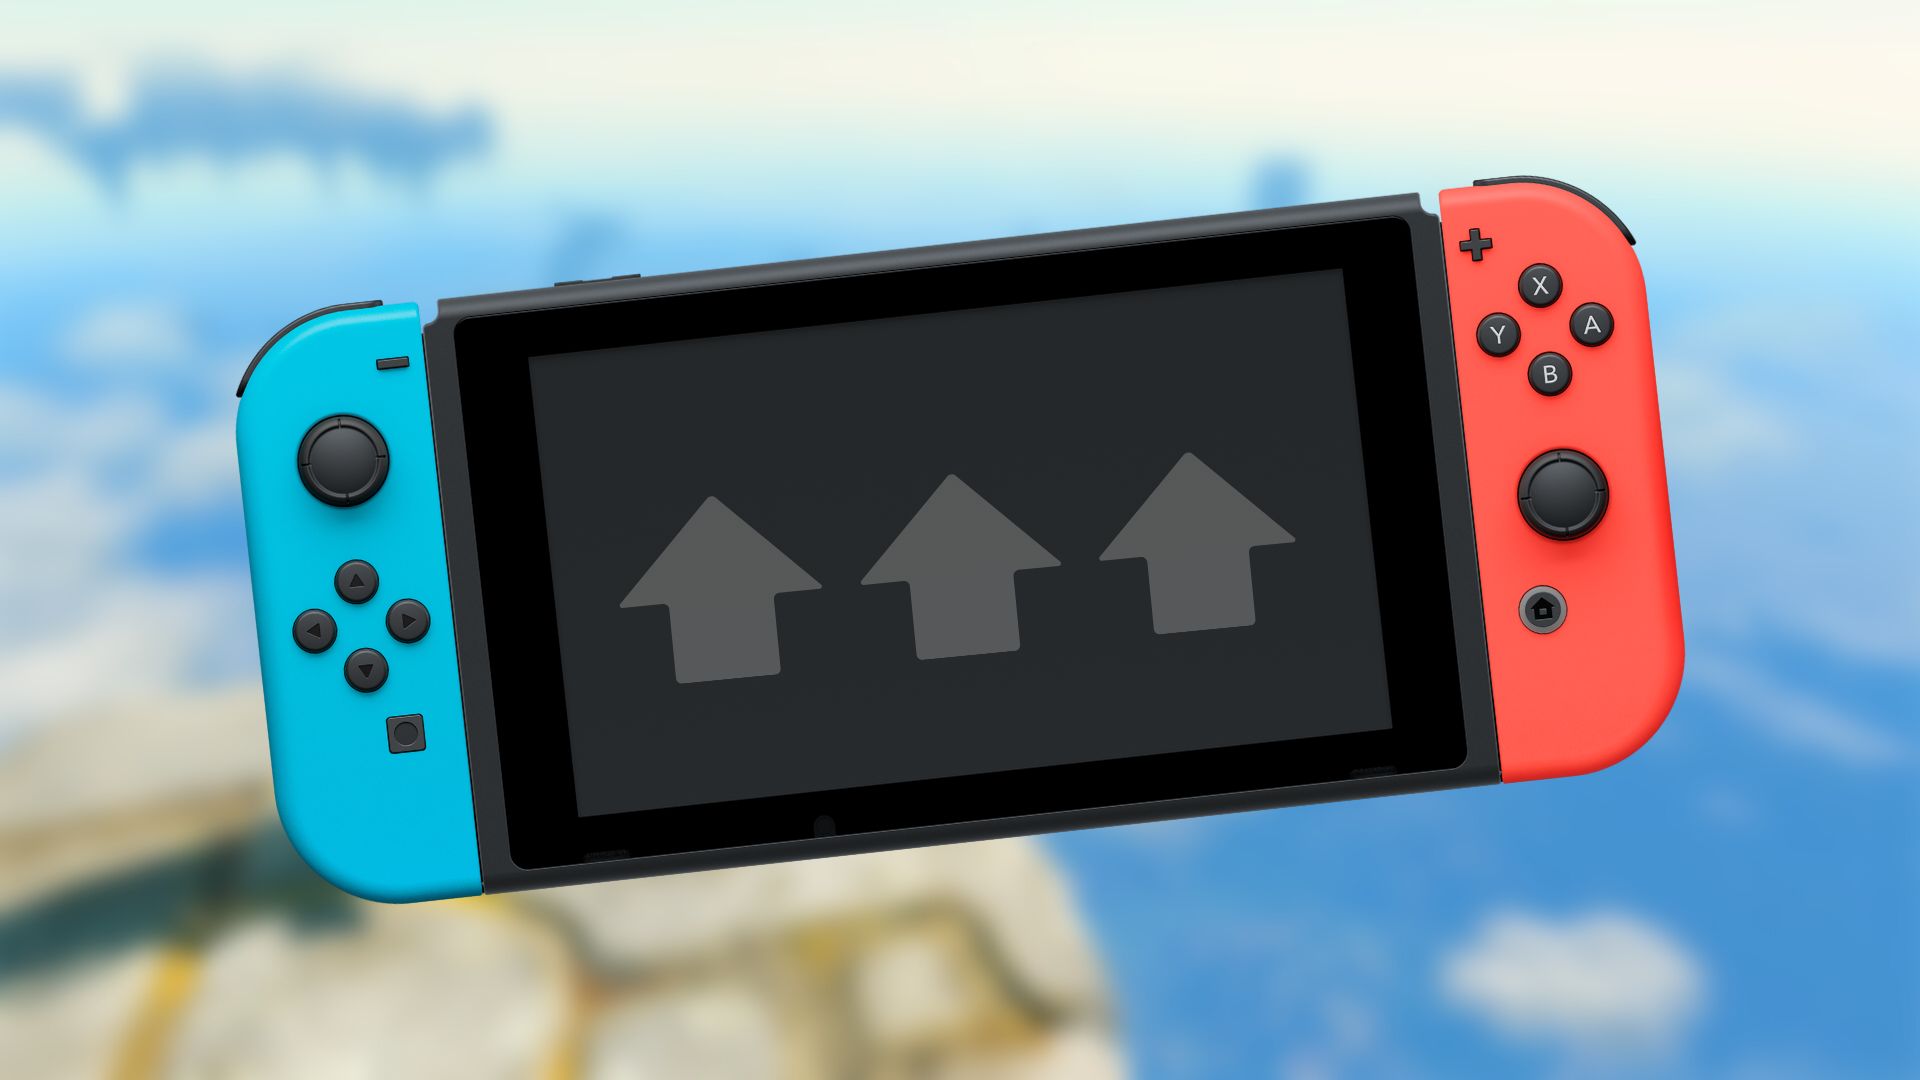 How To Make Nintendo Switch Games Download Faster